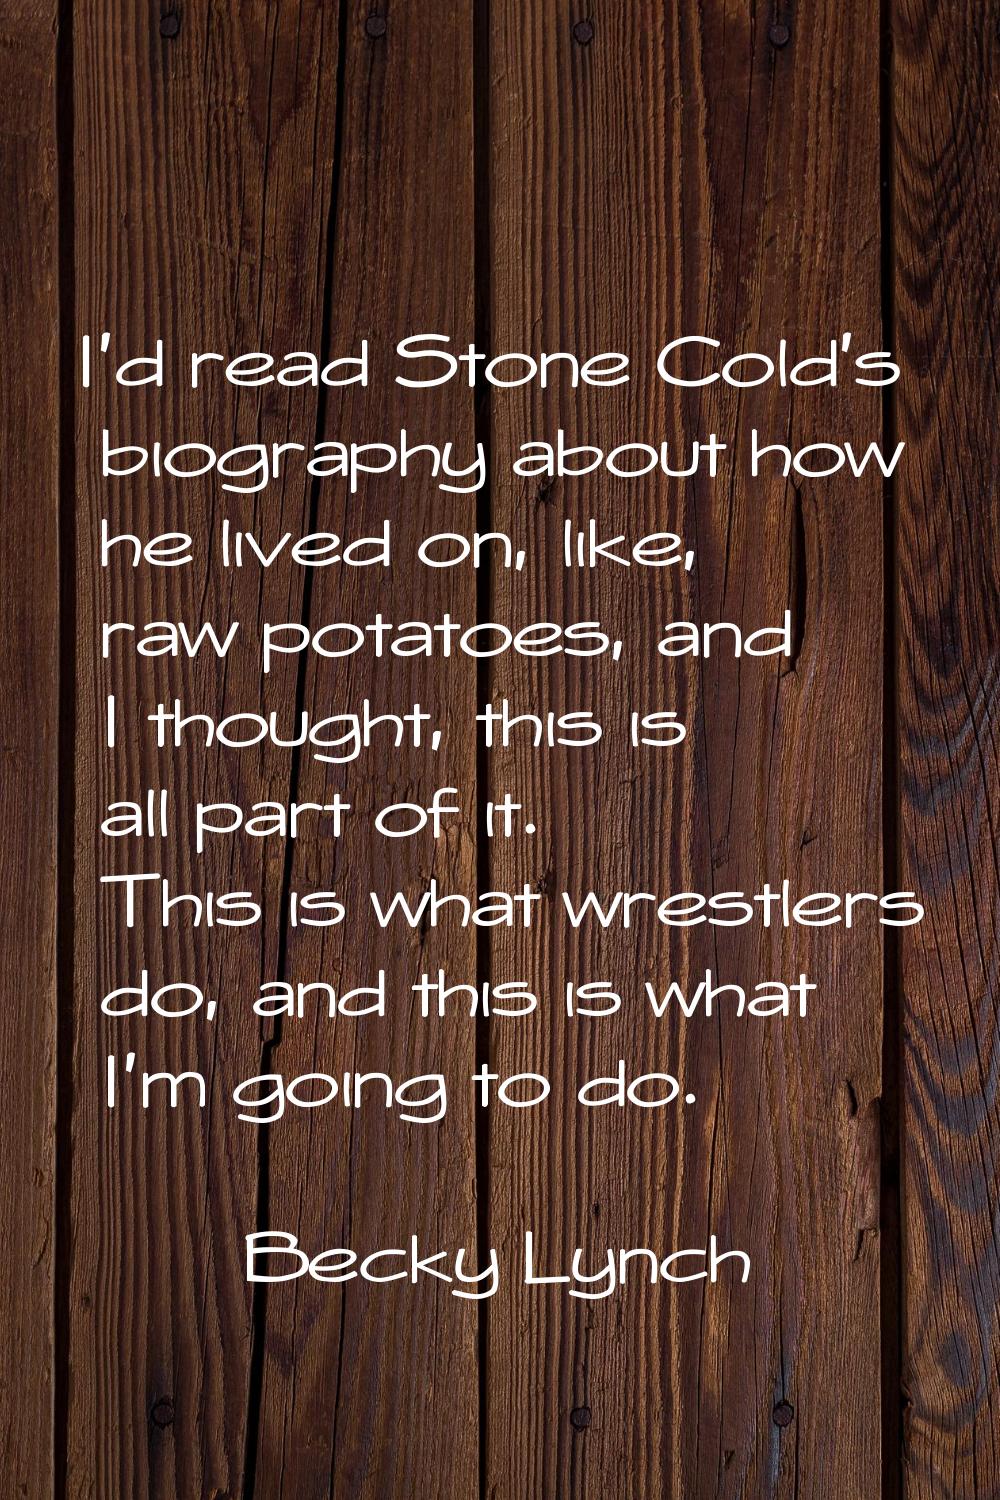 I'd read Stone Cold's biography about how he lived on, like, raw potatoes, and I thought, this is a